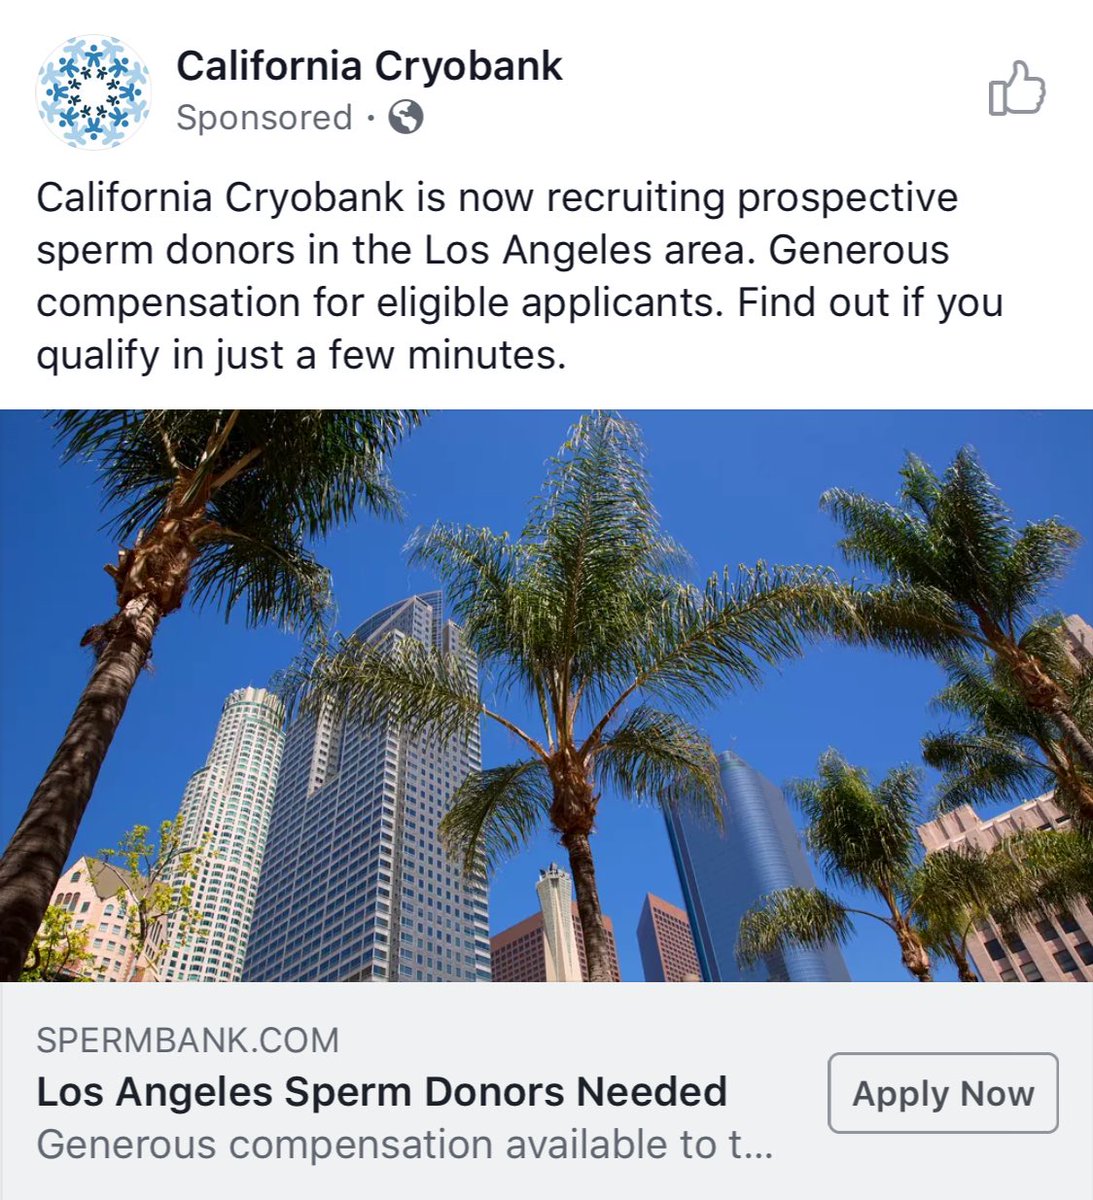 All you do all day is donate sperm to your trash bin, so why not “give back” and help a charitable cause to further the human race #spermneeded #californiadrought